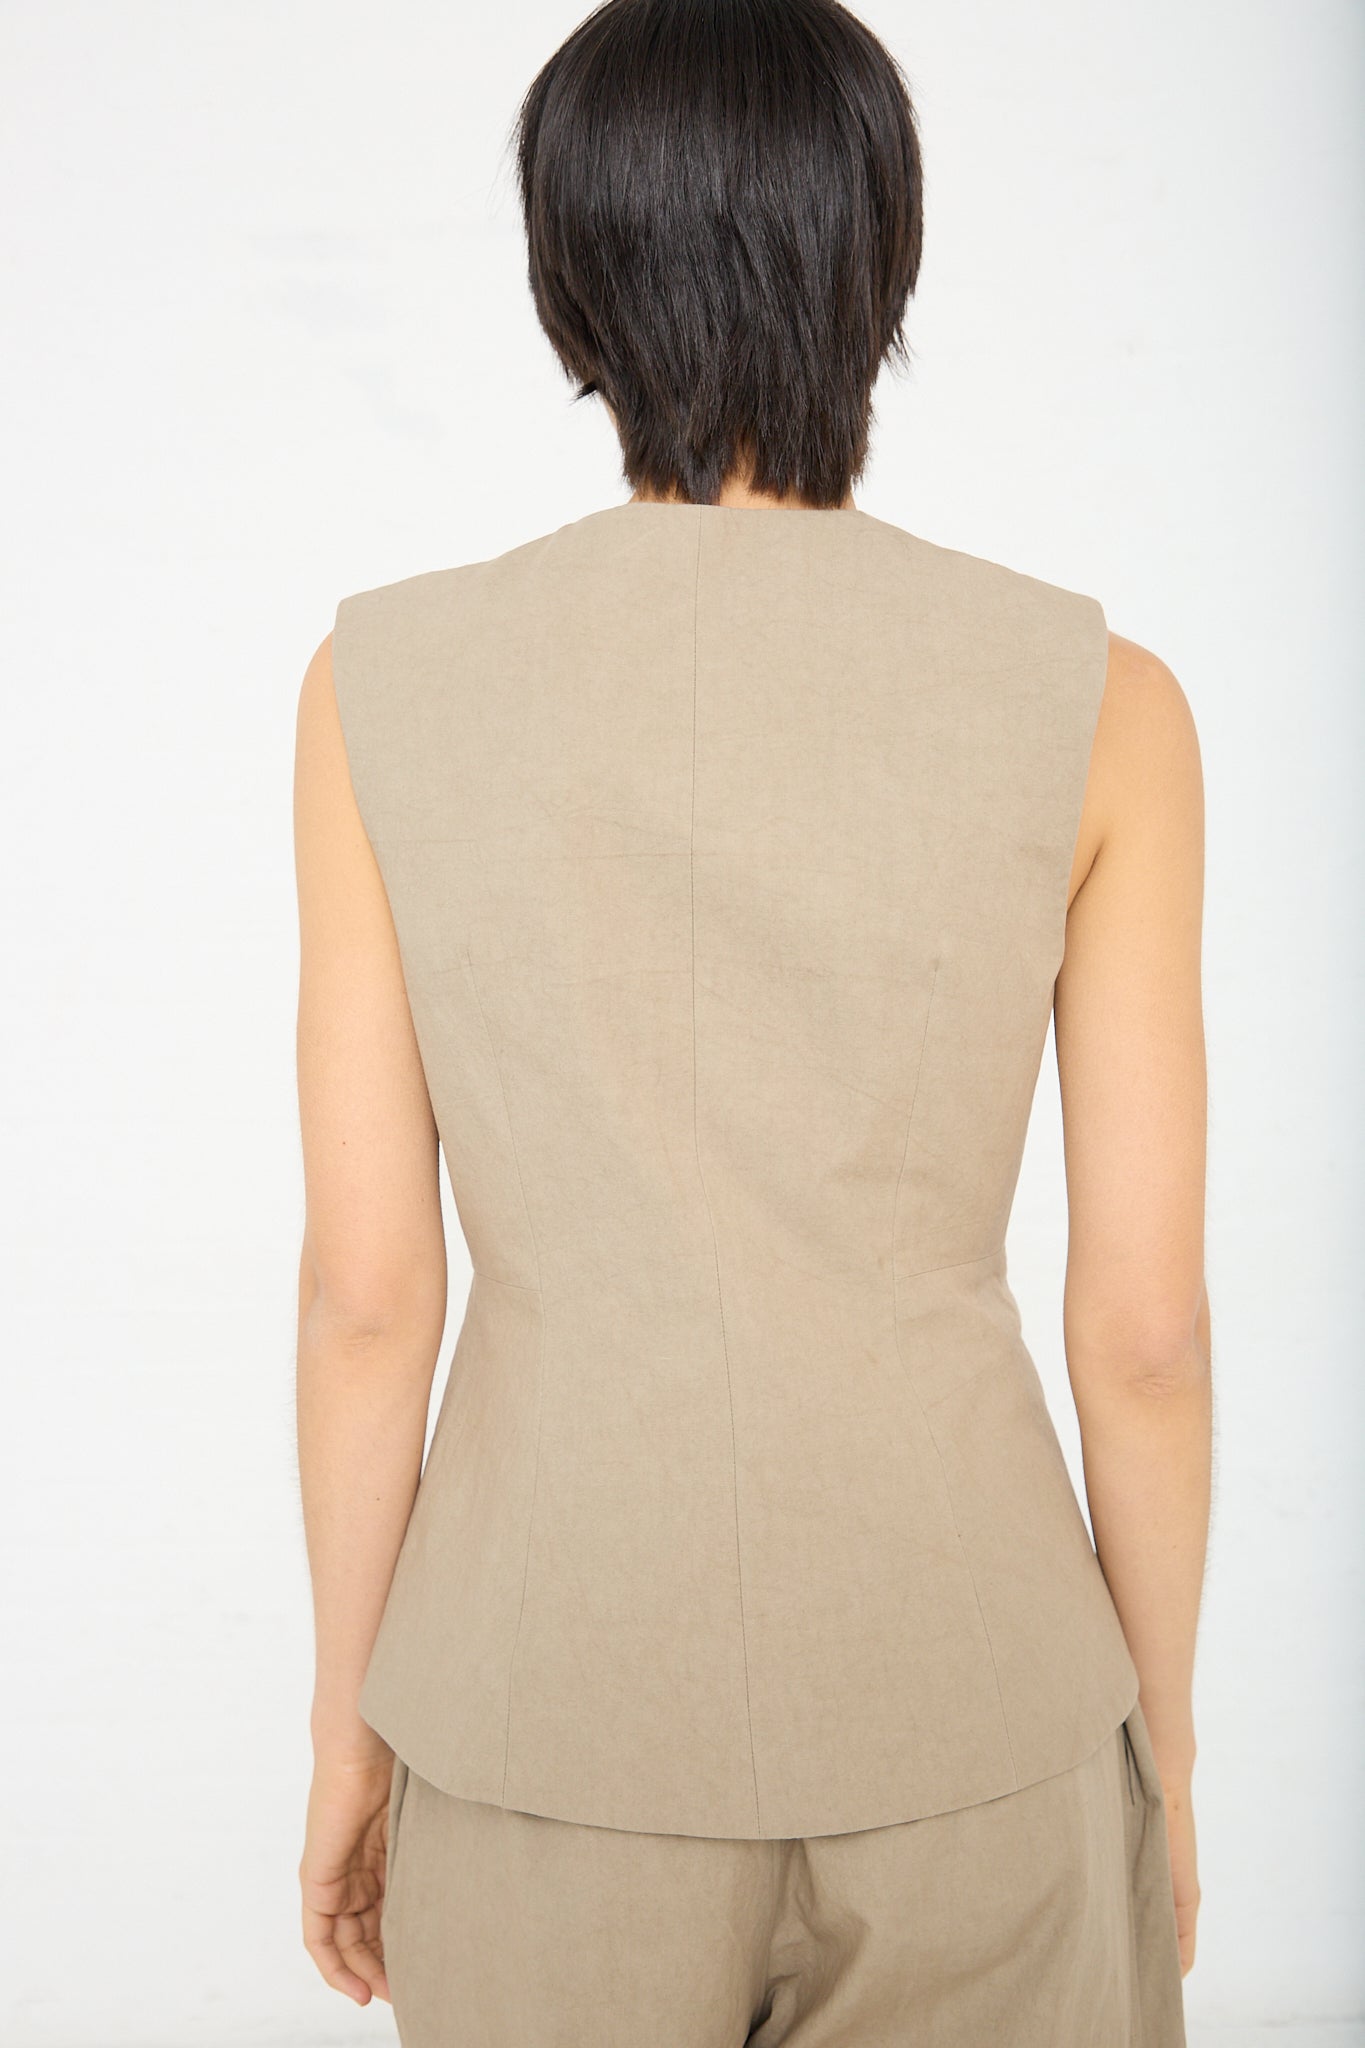 The back view of a woman wearing a Lauren Manoogian Structure Bodice in Drab Olive brown), sleeveless top with matching pants.